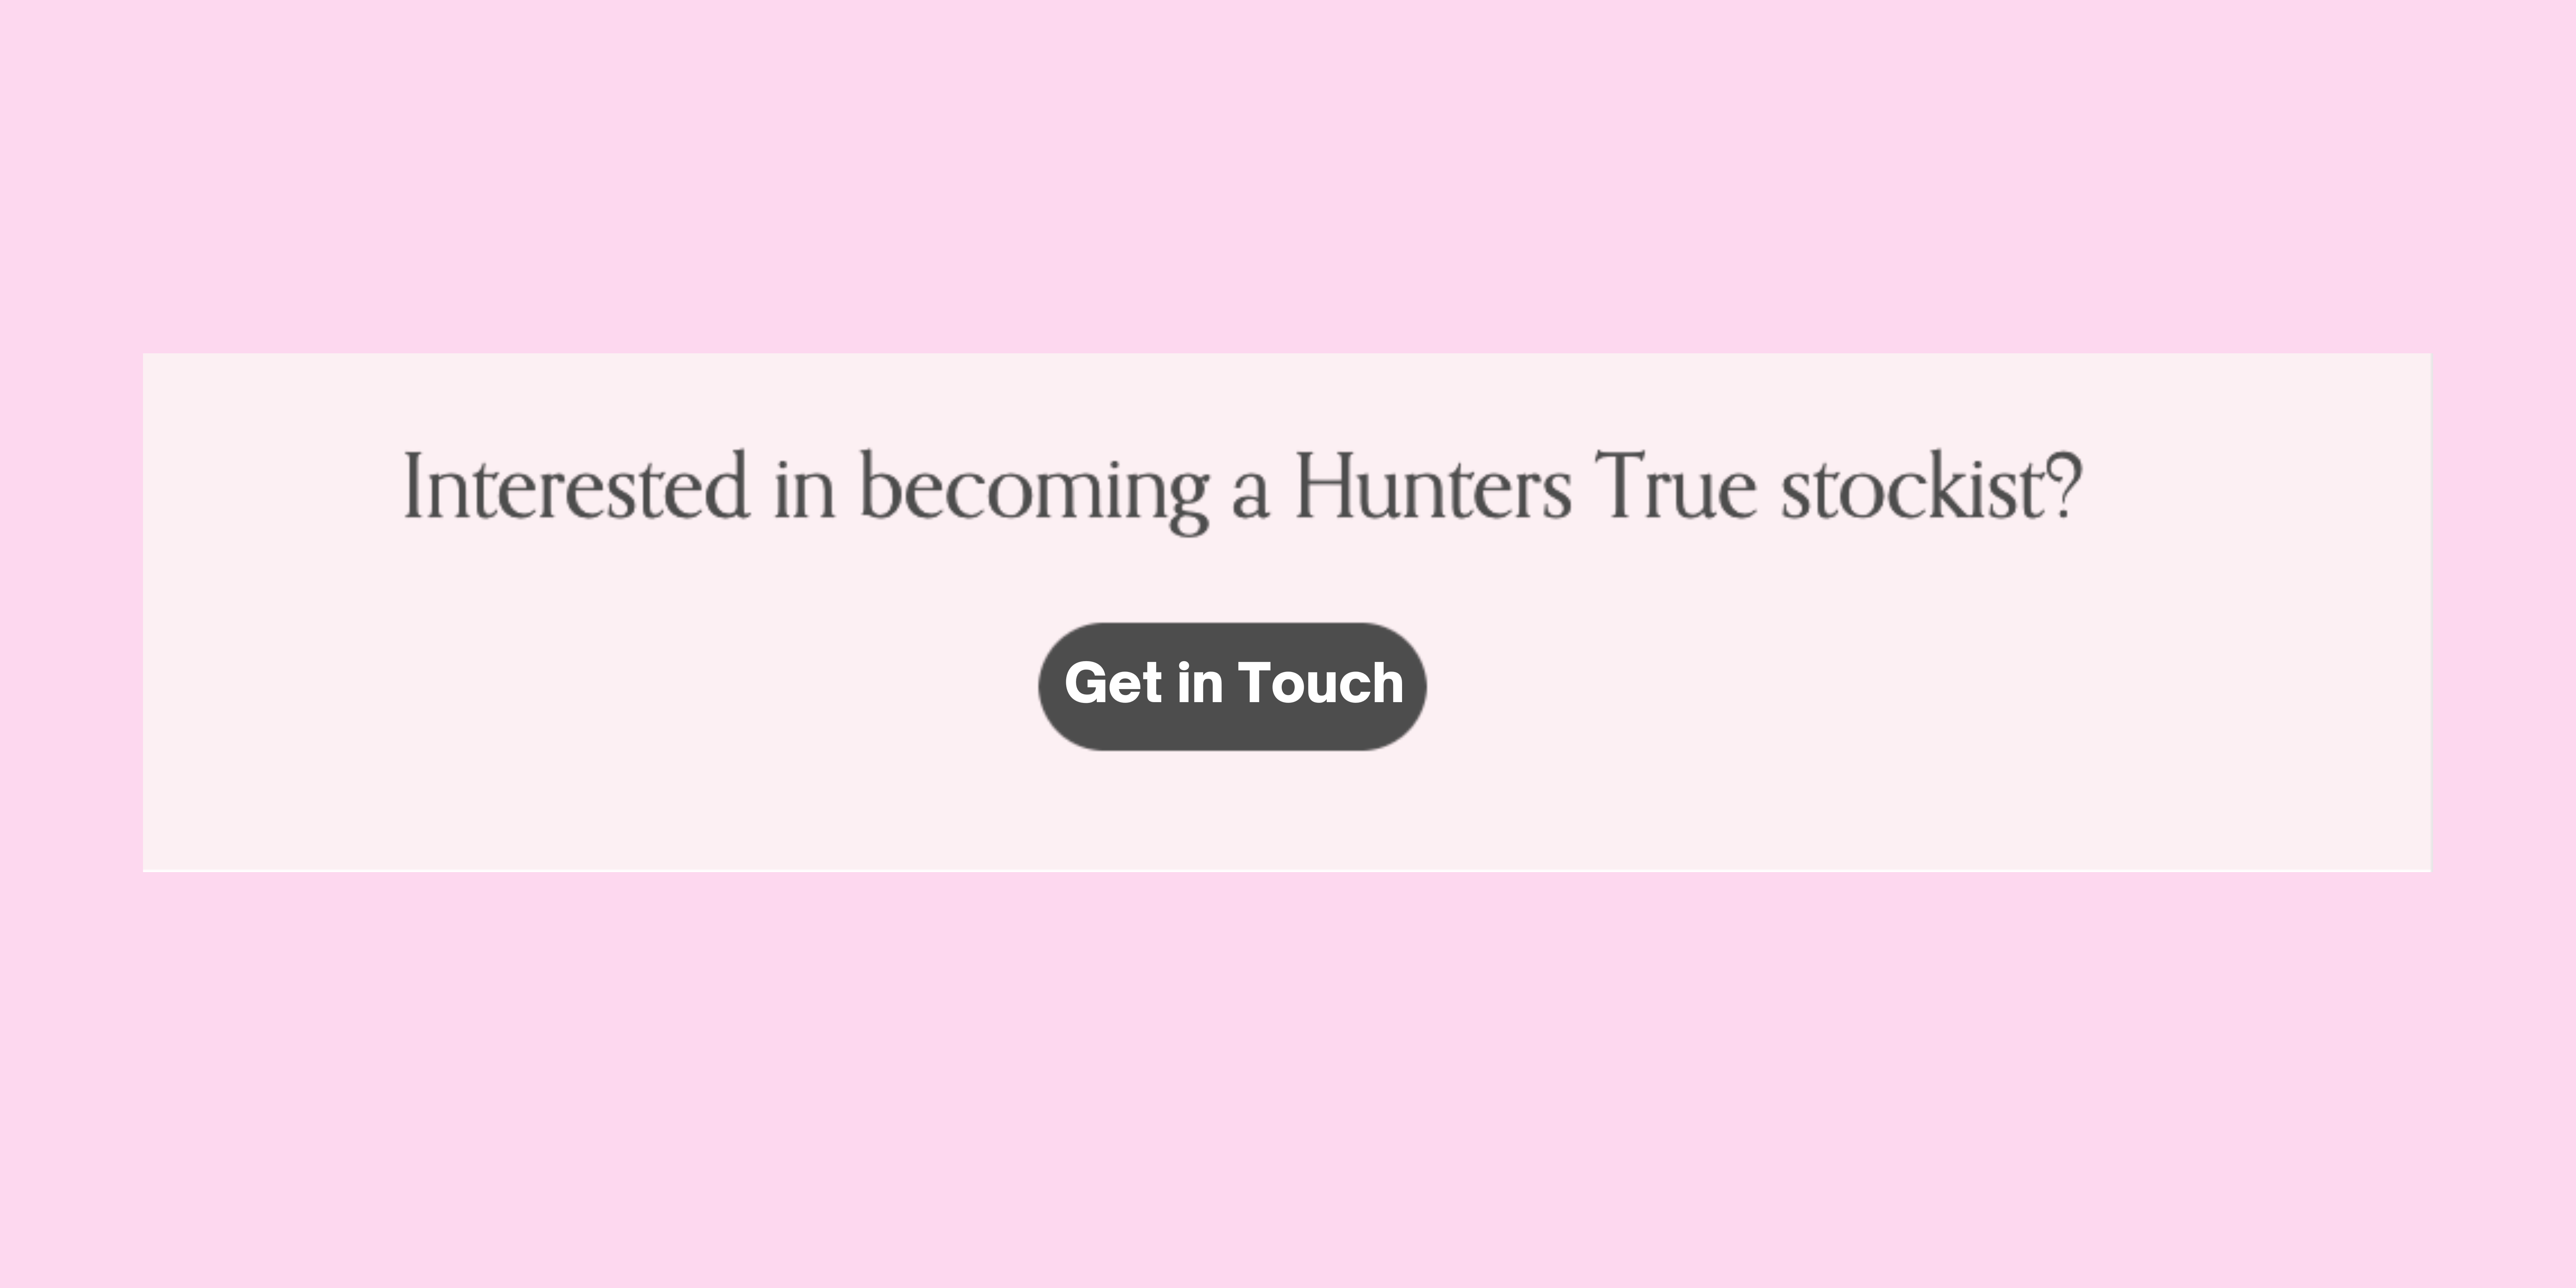 Get in touch to become a Hunters True stockist